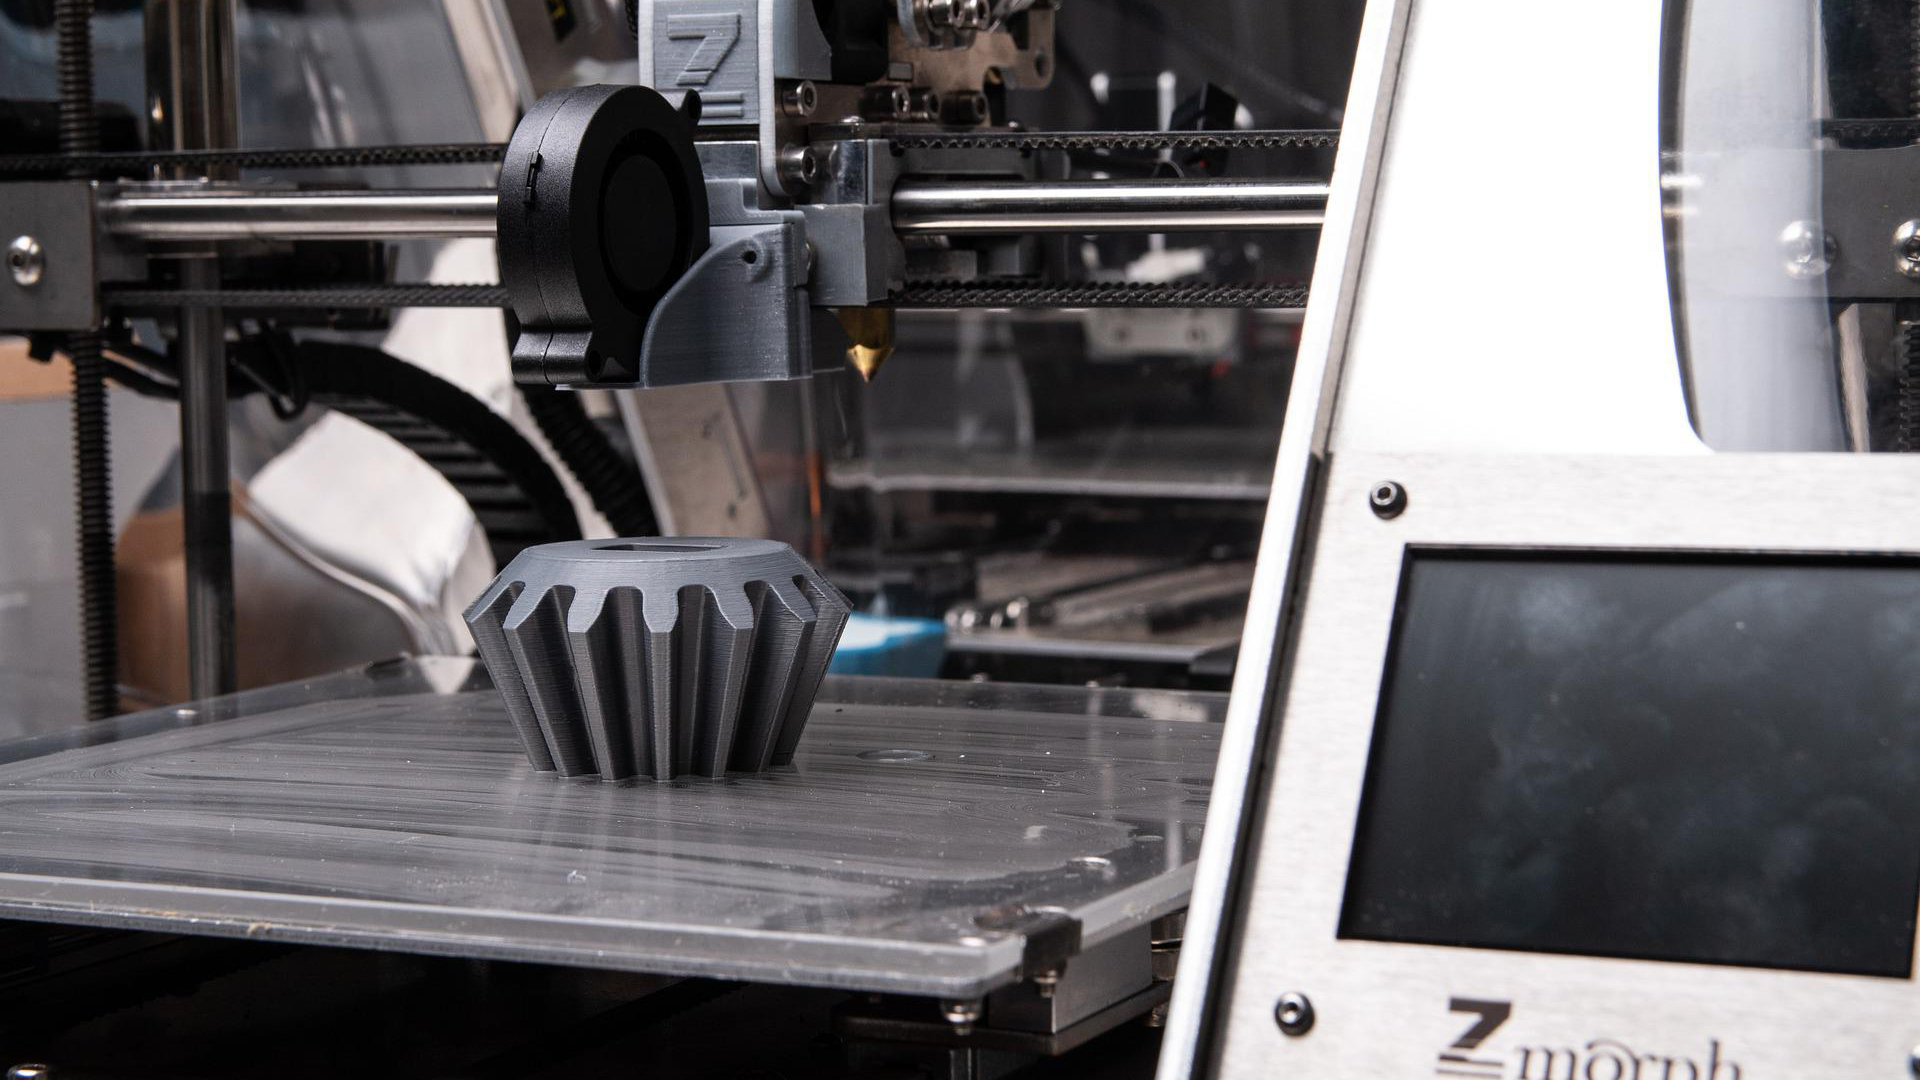 The combination of injection molding and 3D printing - pellet 3D printing